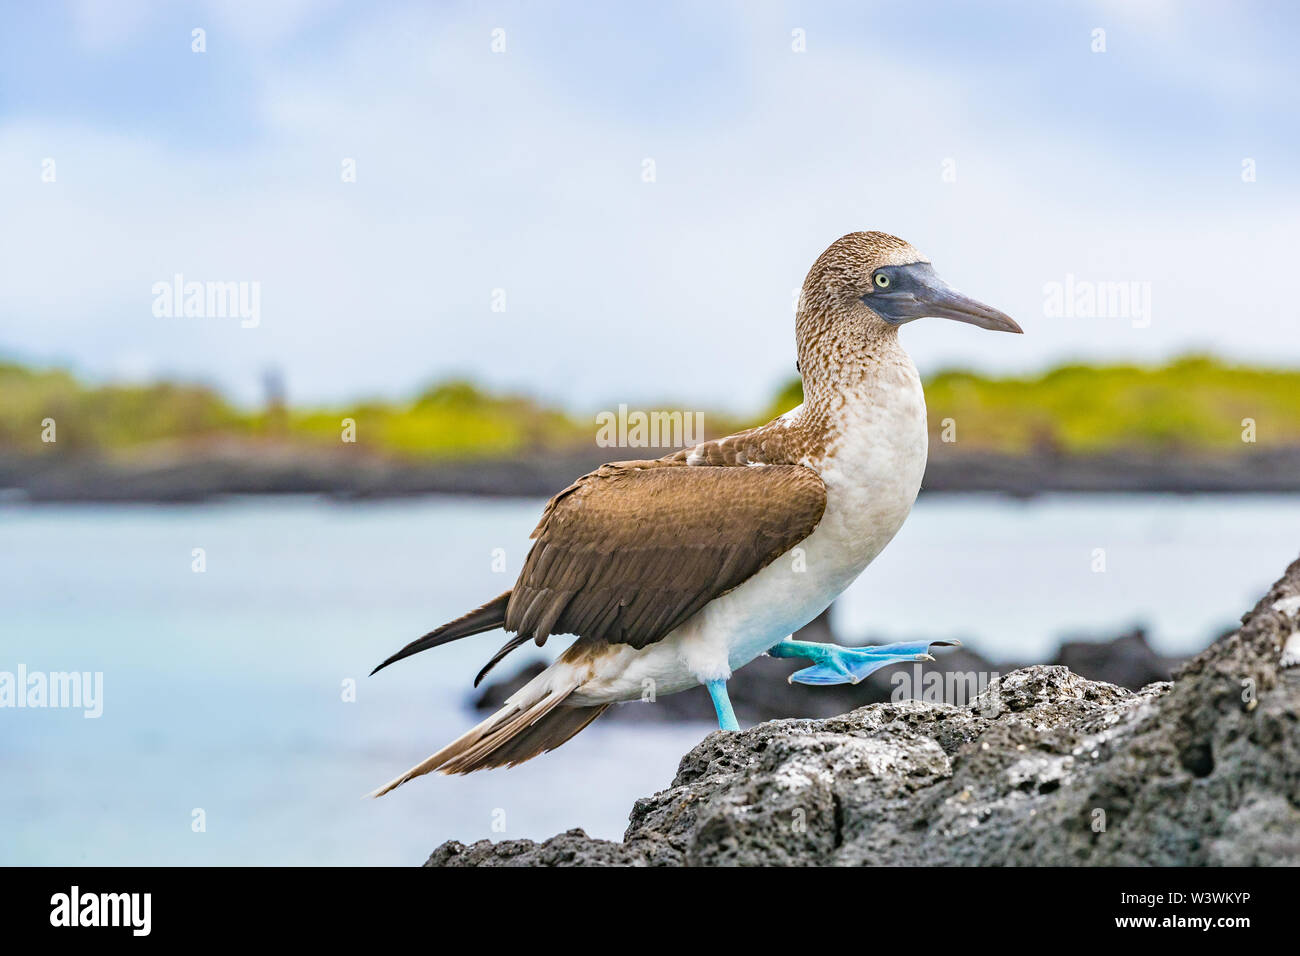 Blue-footed Booby - Iconic and famous galapagos animals and wildlife. Blue footed boobies are native to the Galapagos Islands, Ecuador, South America. Stock Photo